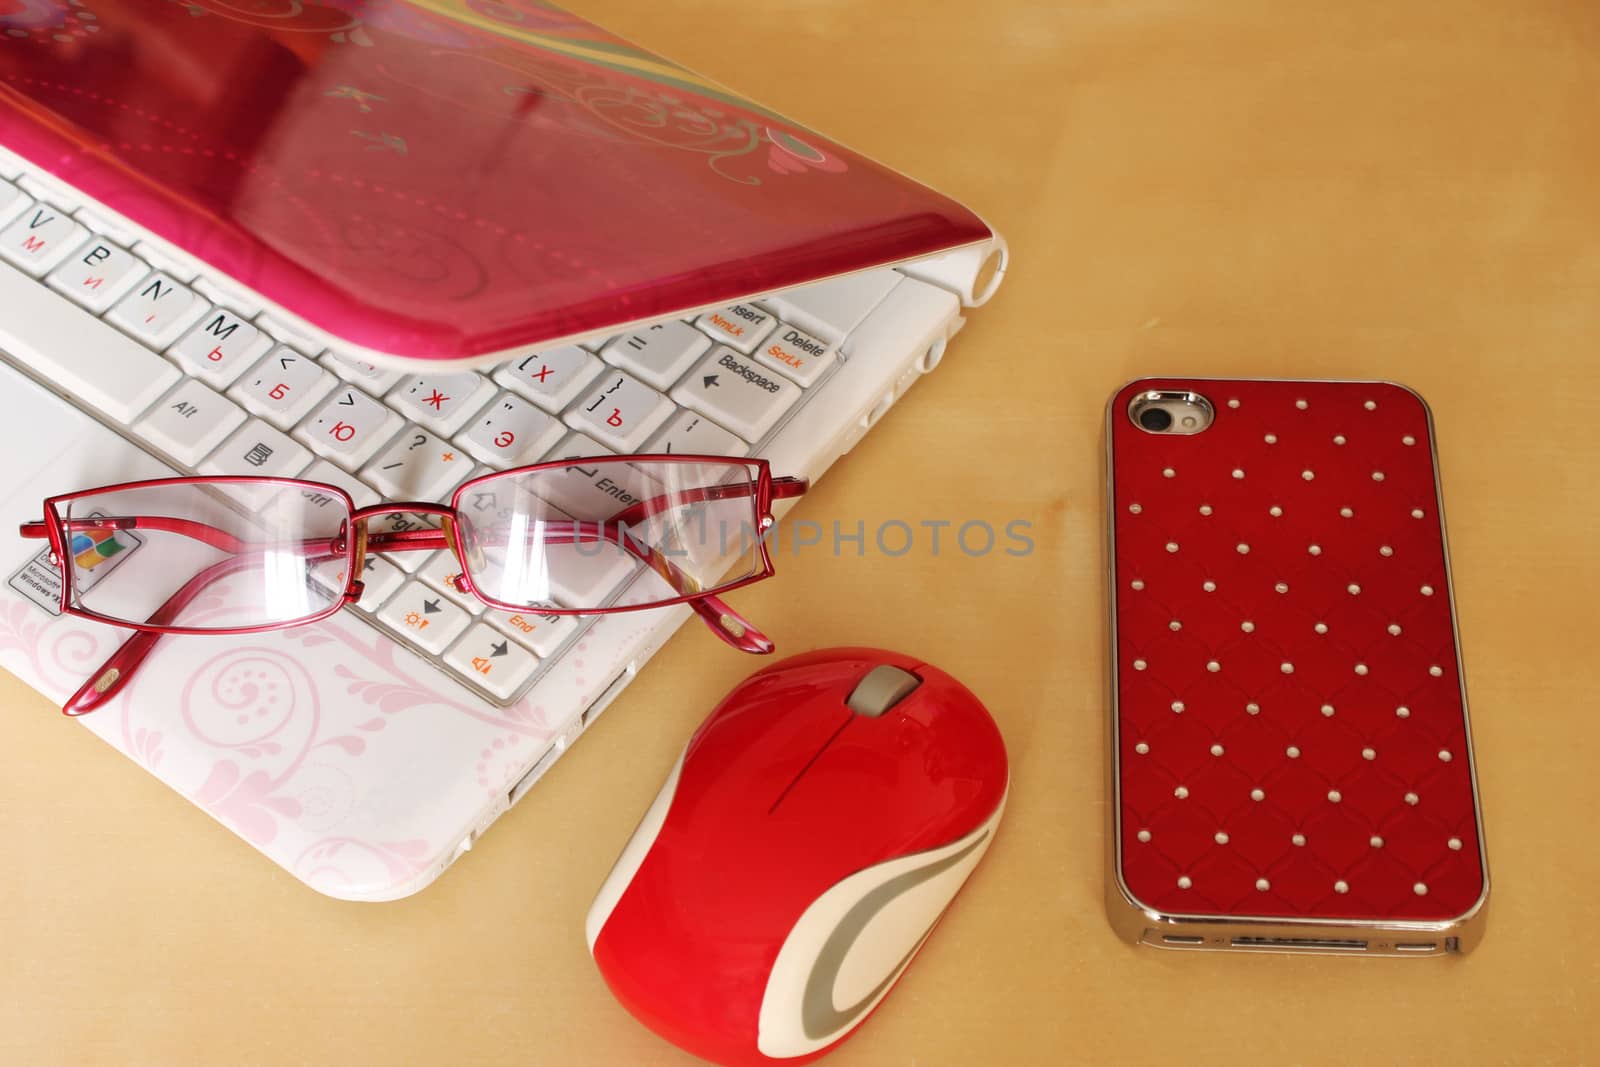 Computer, watches, sunglasses, mobile phone in red color scheme